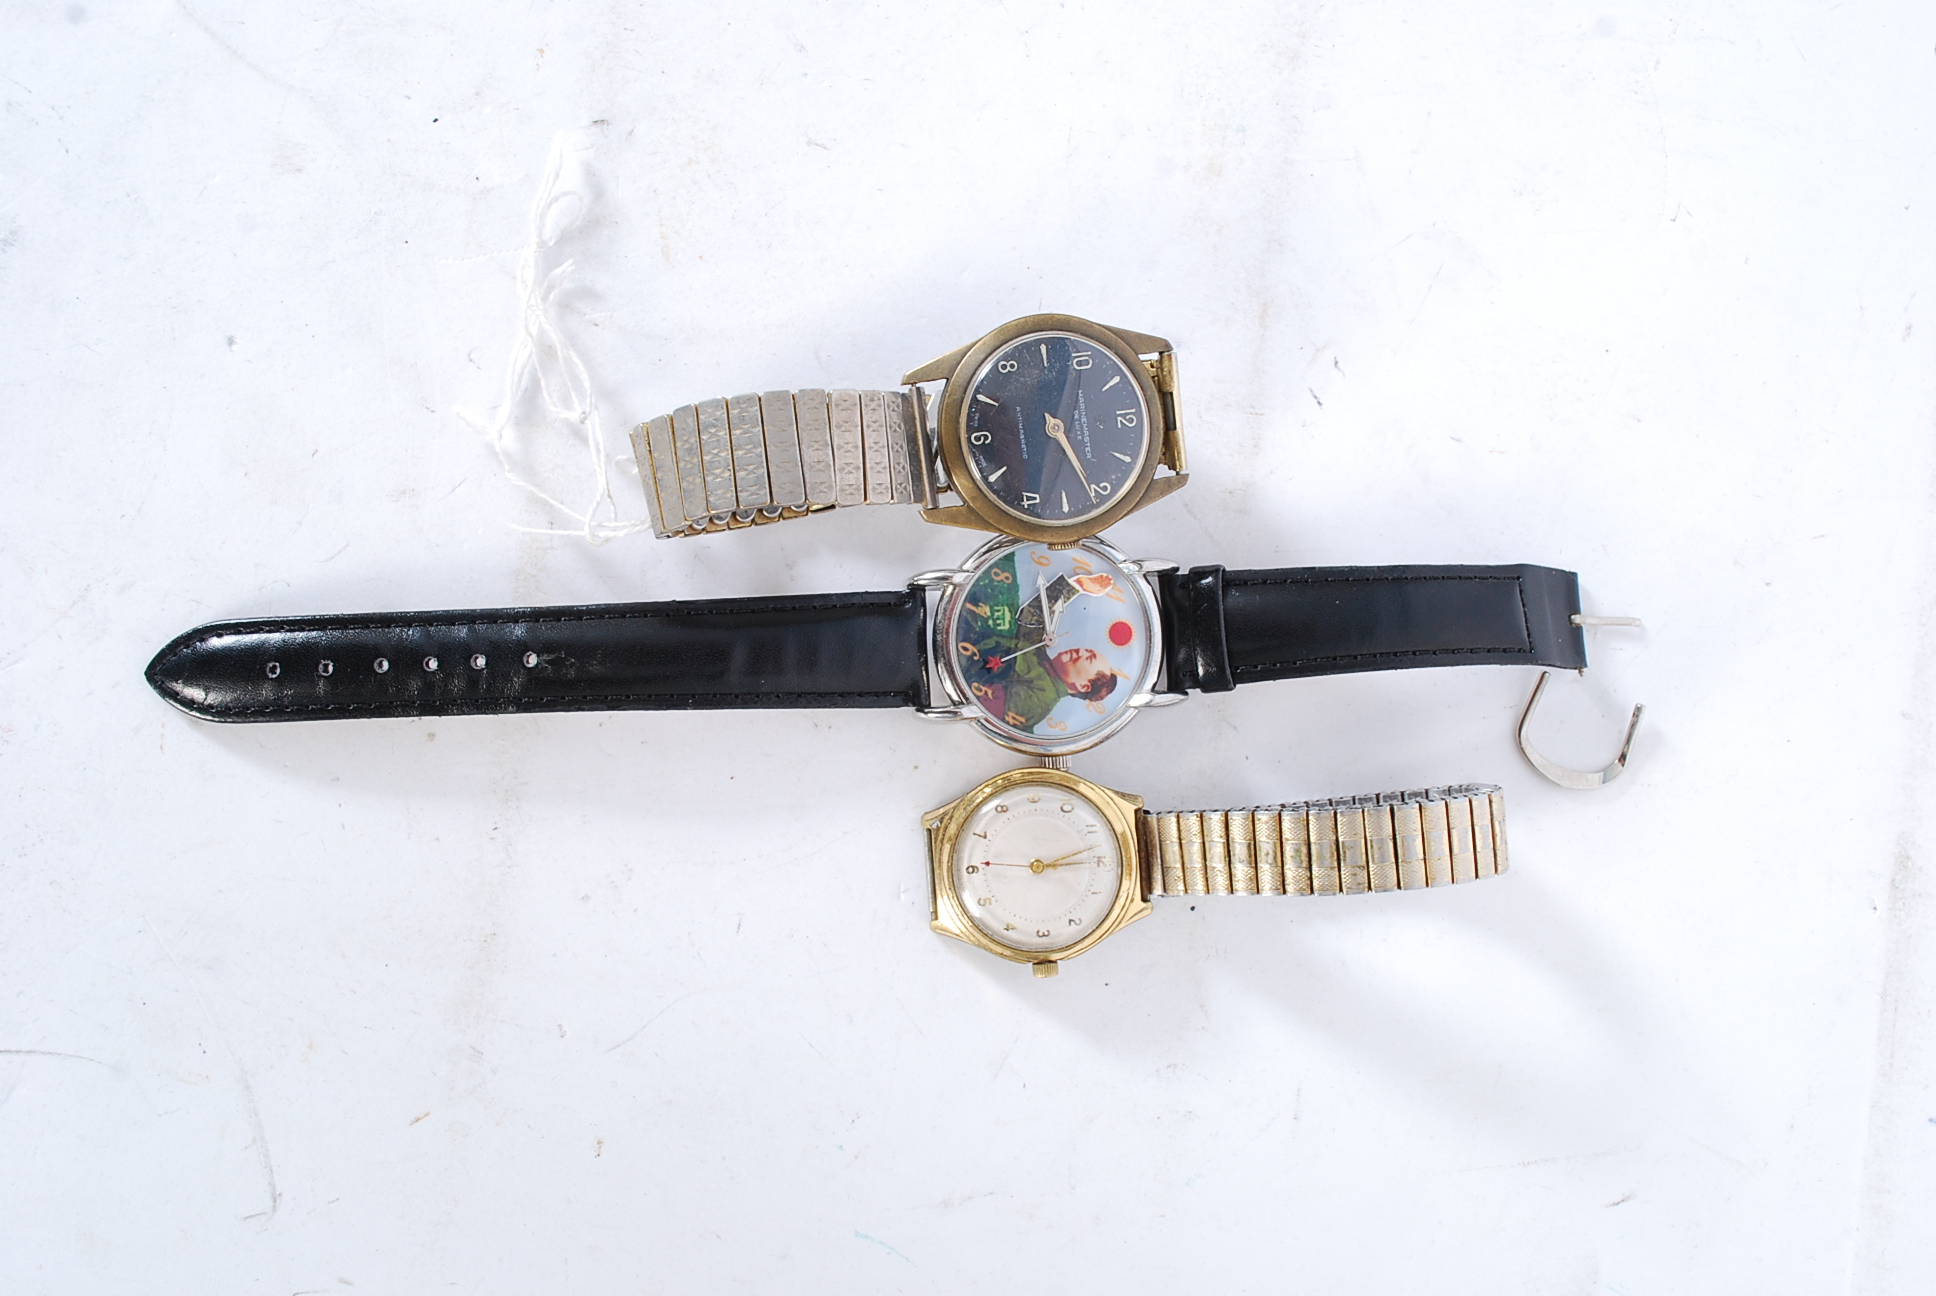 3 Mechanical watches to include a black faced marinemaster de luxe, KJAG 234190 and a chinese